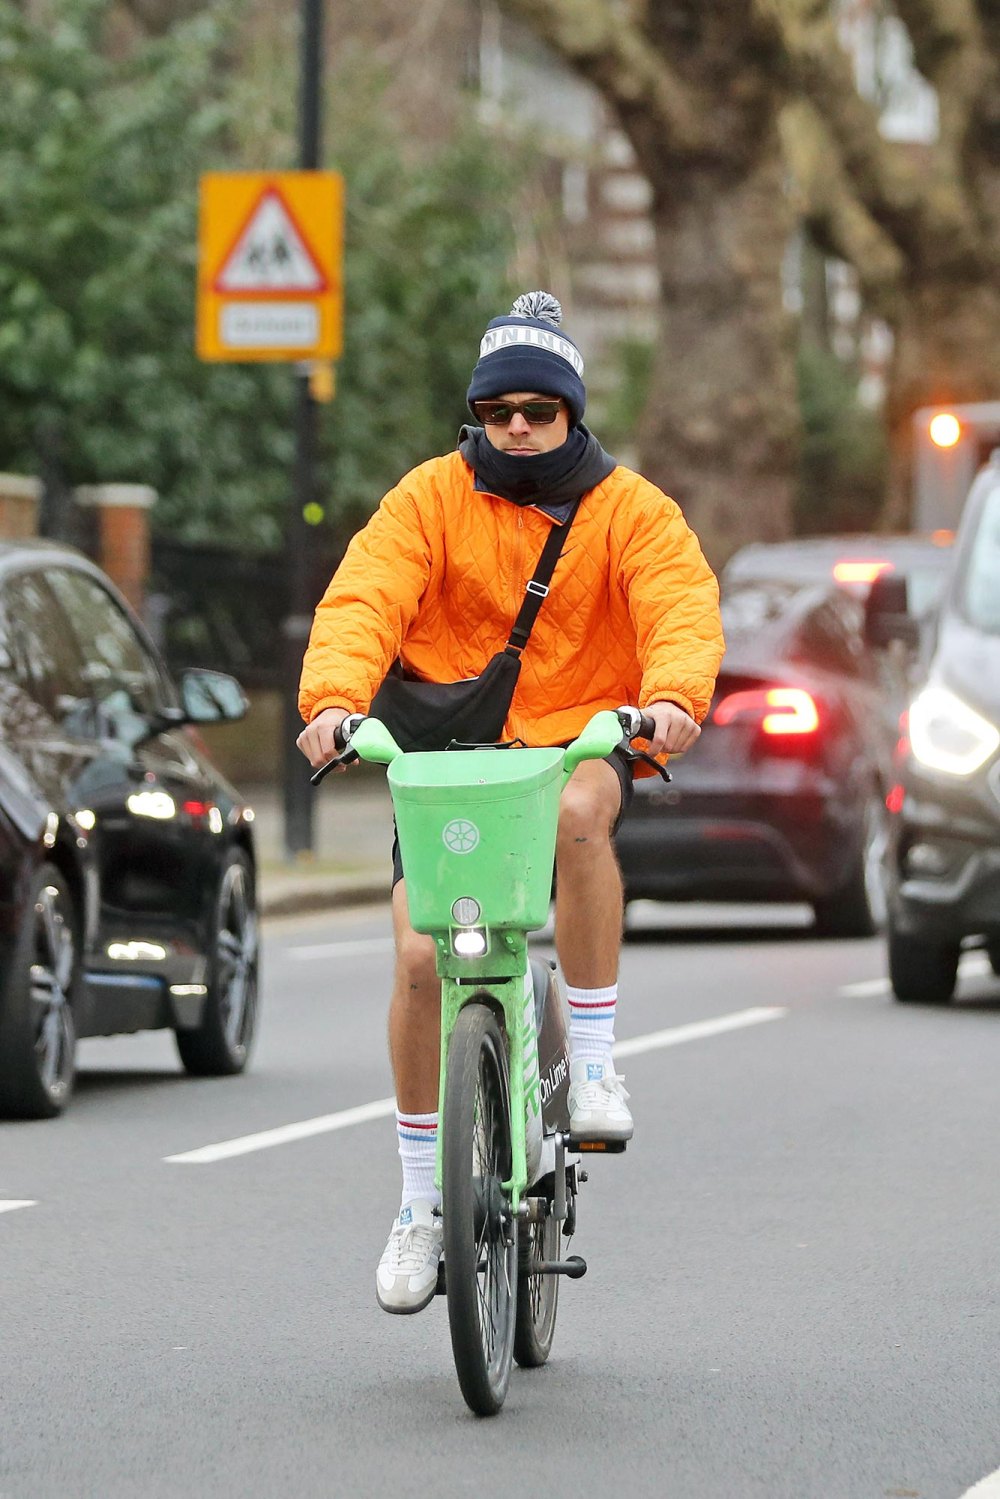 Harry Styles Looks Lovely in Neon As He Enjoys His 30th Birthday in London